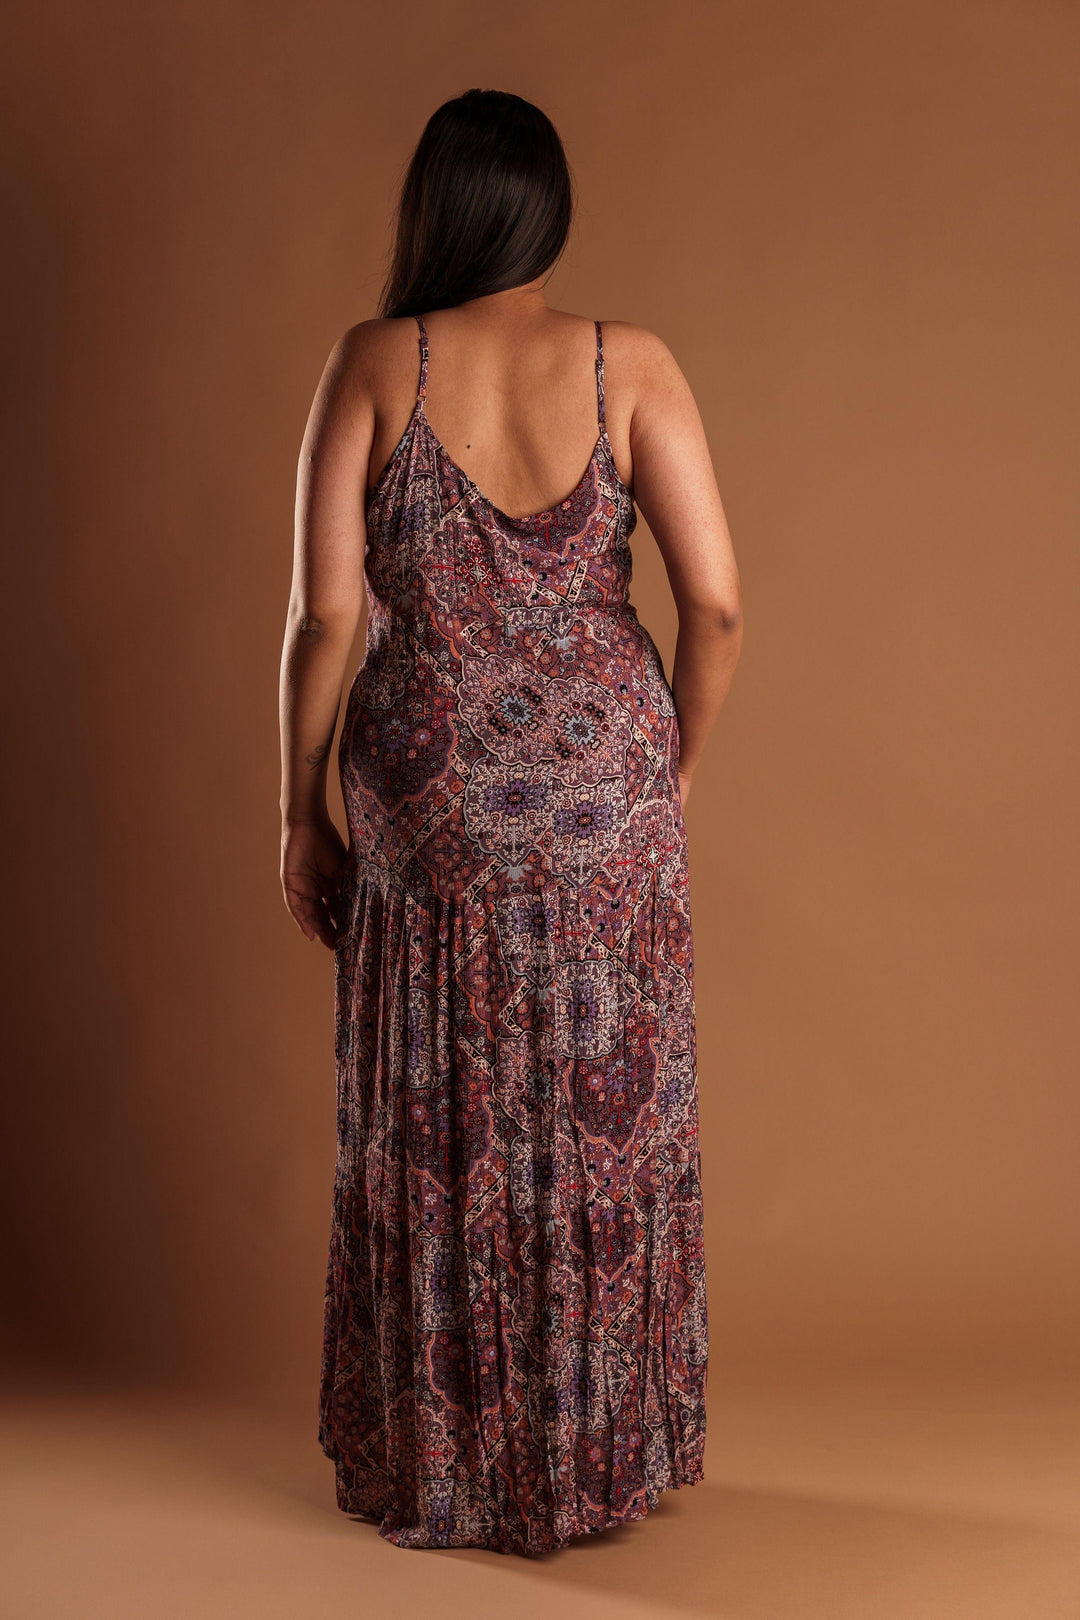 PLUS SIZE PATCHWORK OVERSIZED PRINTED MAXI DRESS - Esme and Elodie